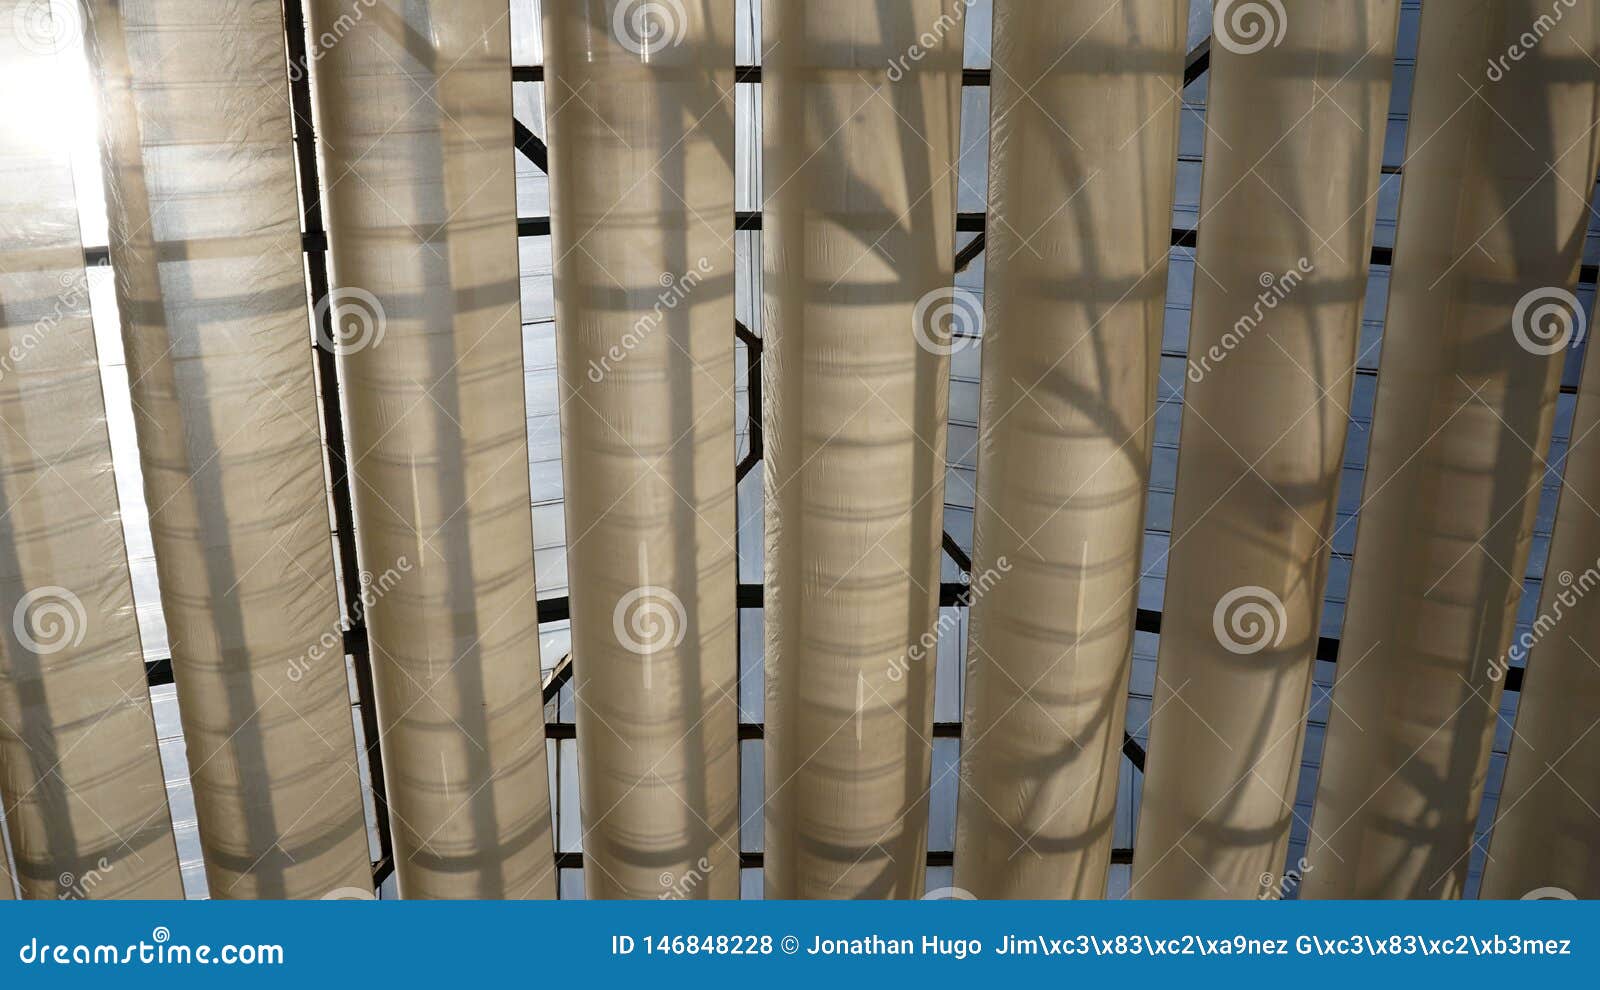 Fabric Hanging Tubes Stock Photo Image Of Long Vertical